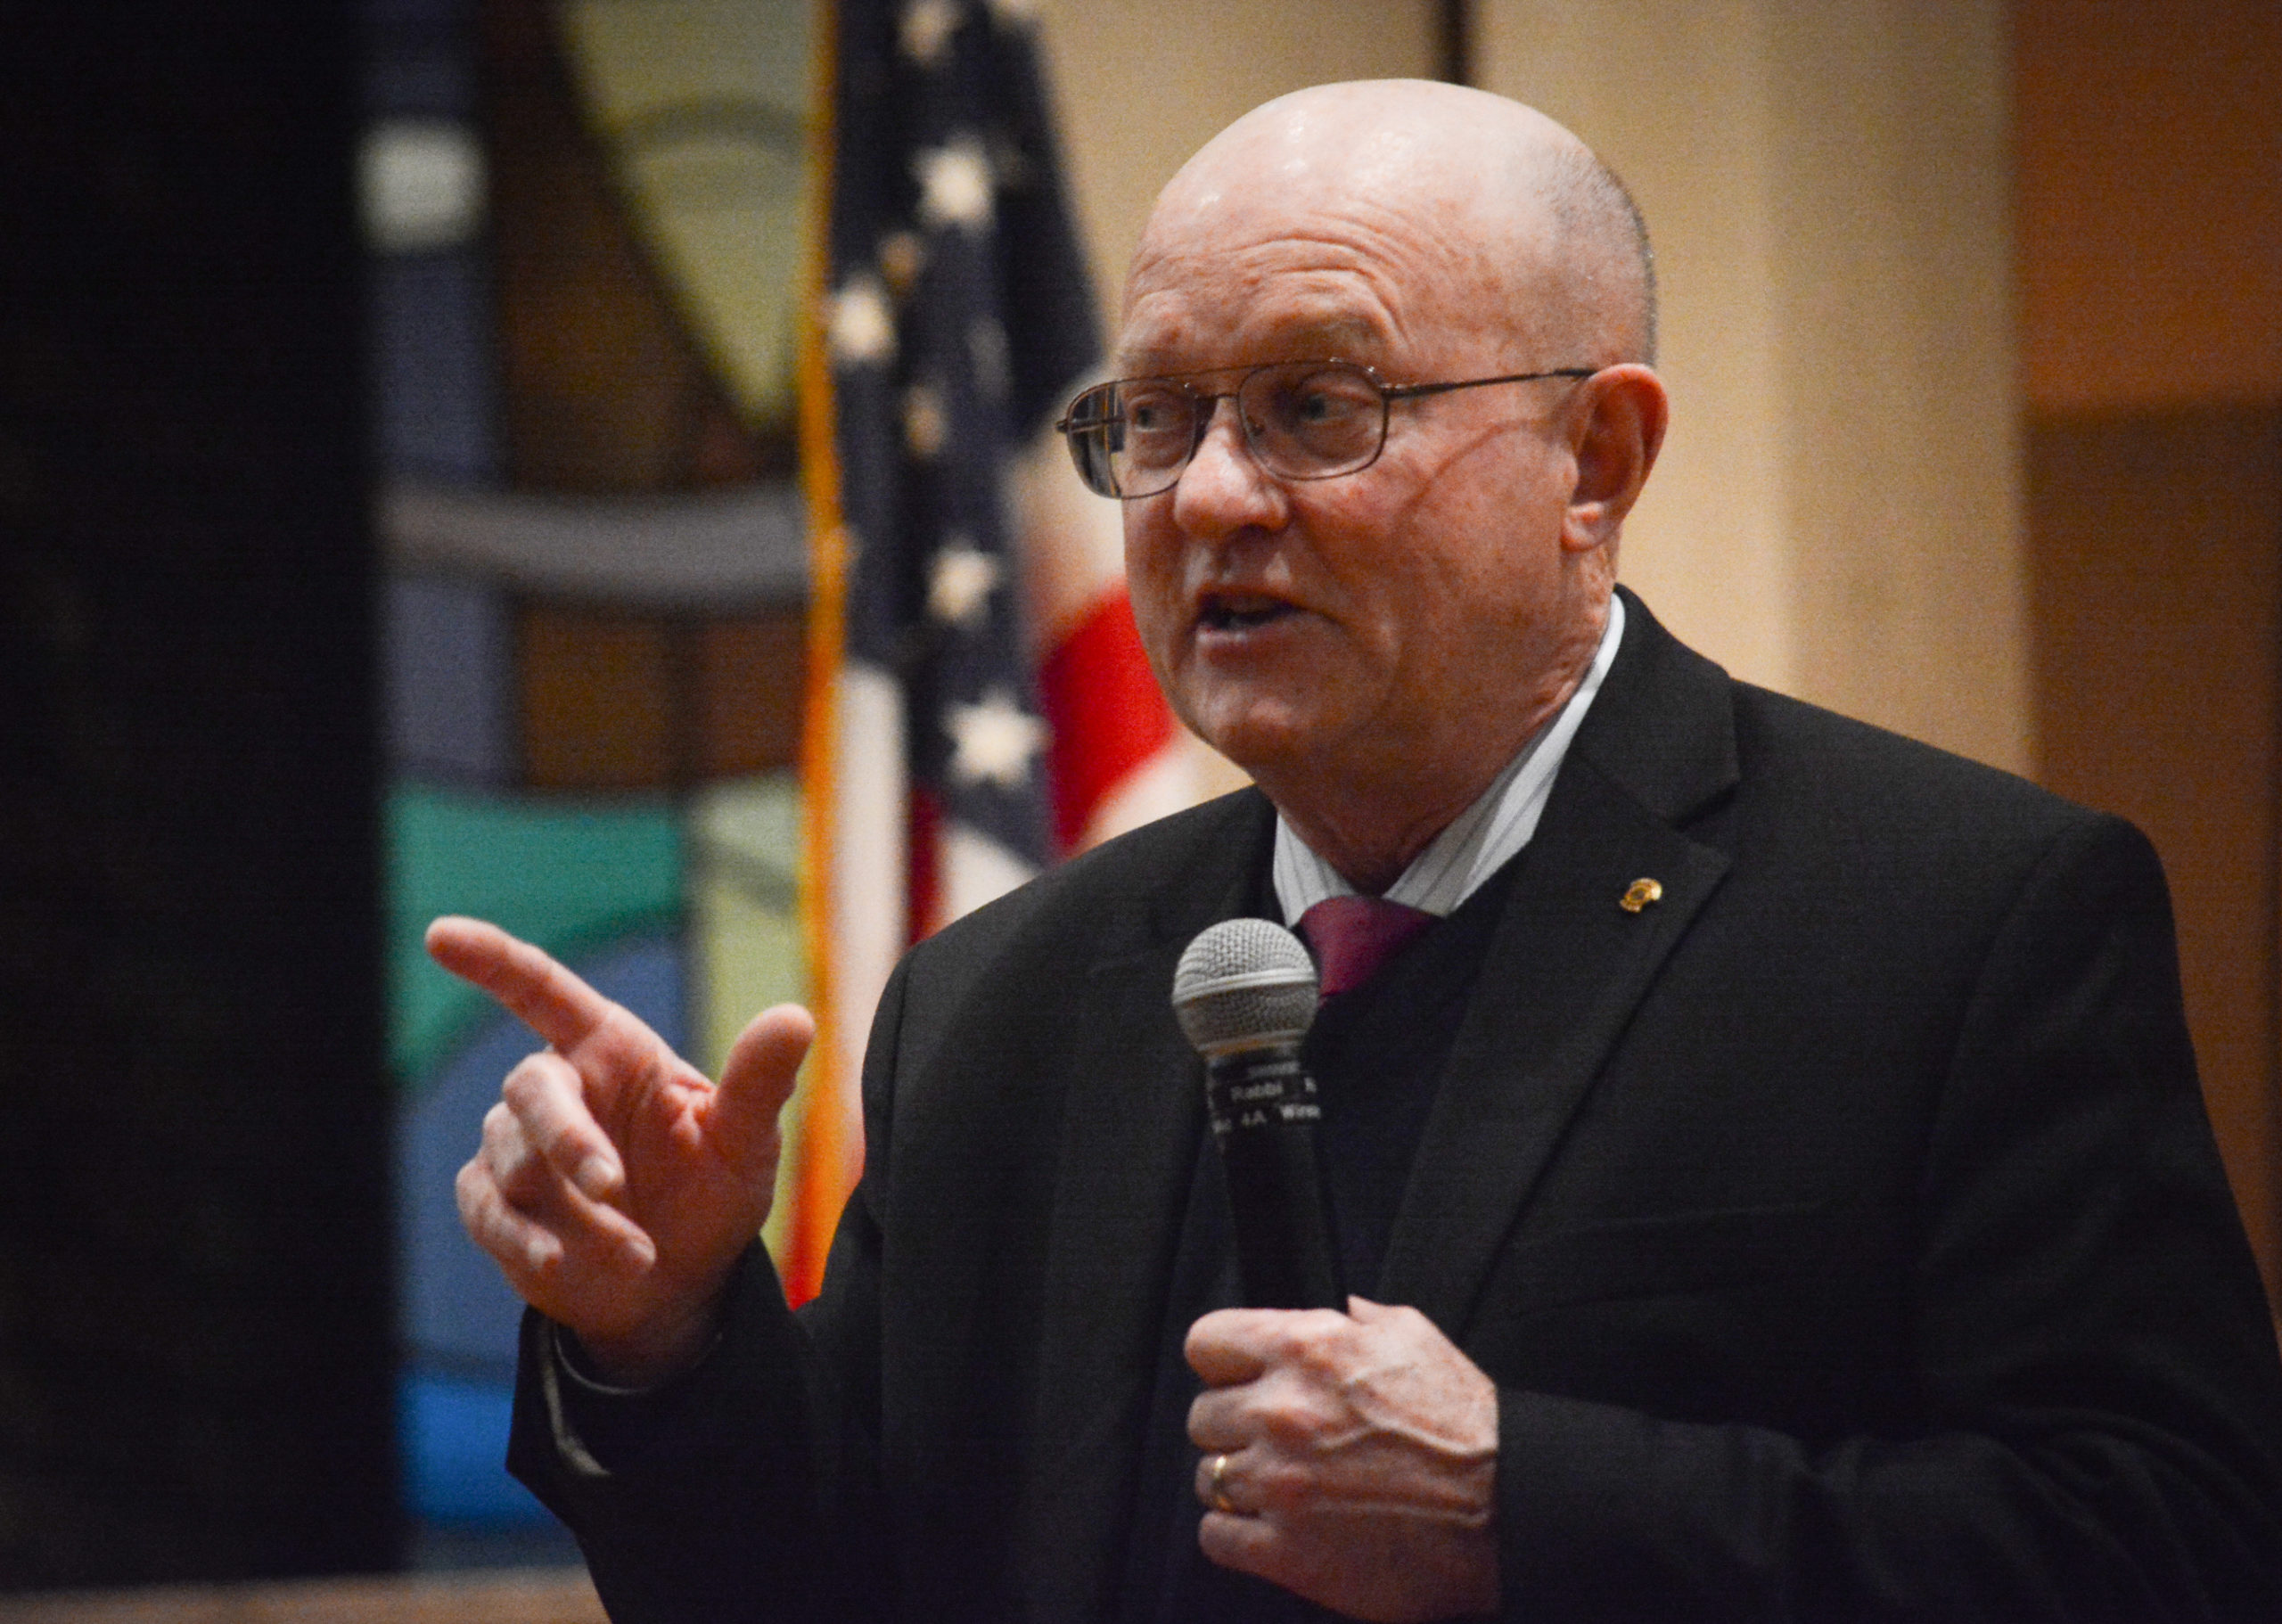 Col. Lawrence Wilkerson, who was chief of staff to Secretary of State Colin Powell, speaks to congregants at Temple Emanuel of Great Neck on what a sound foreign policy should look like. (Photo by Janelle Clausen)